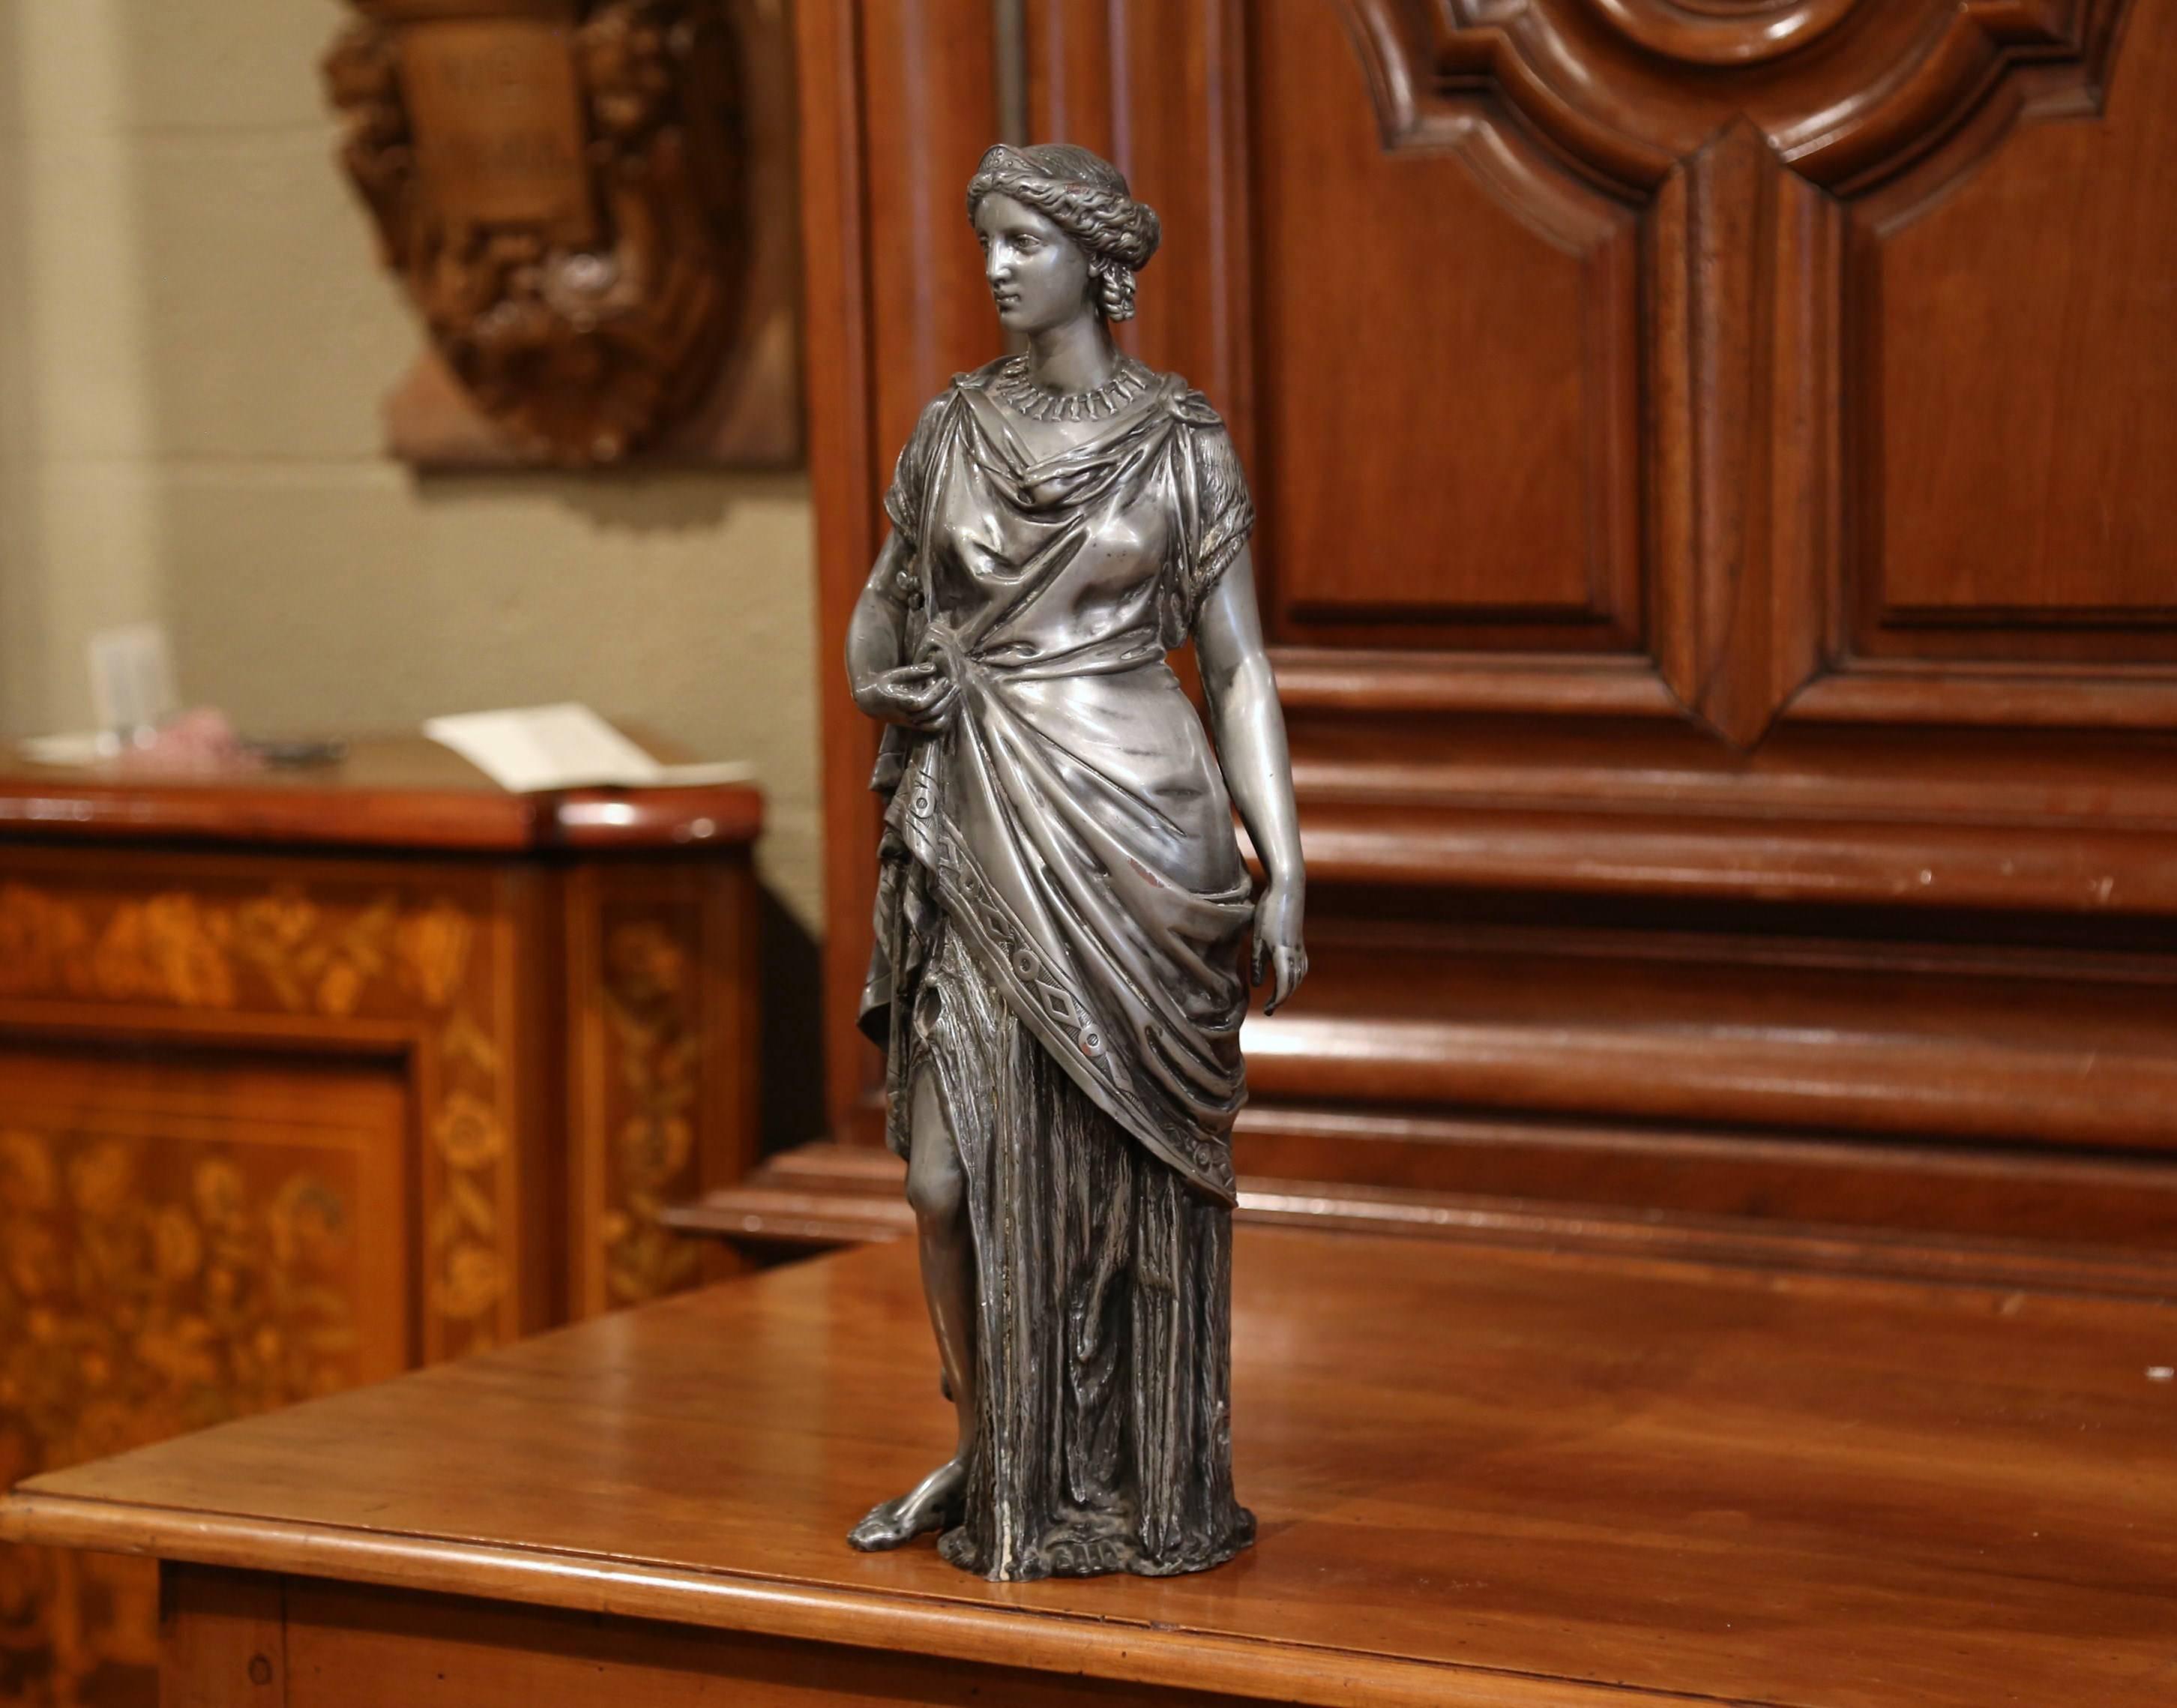 This elegant and detailed antique statue was sculpted in France, circa 1870. The beautiful, traditional figure made of pewter, features a Roman goddess figure dressed in elaborate clothing and jewelry. The figurative sculpture is in excellent